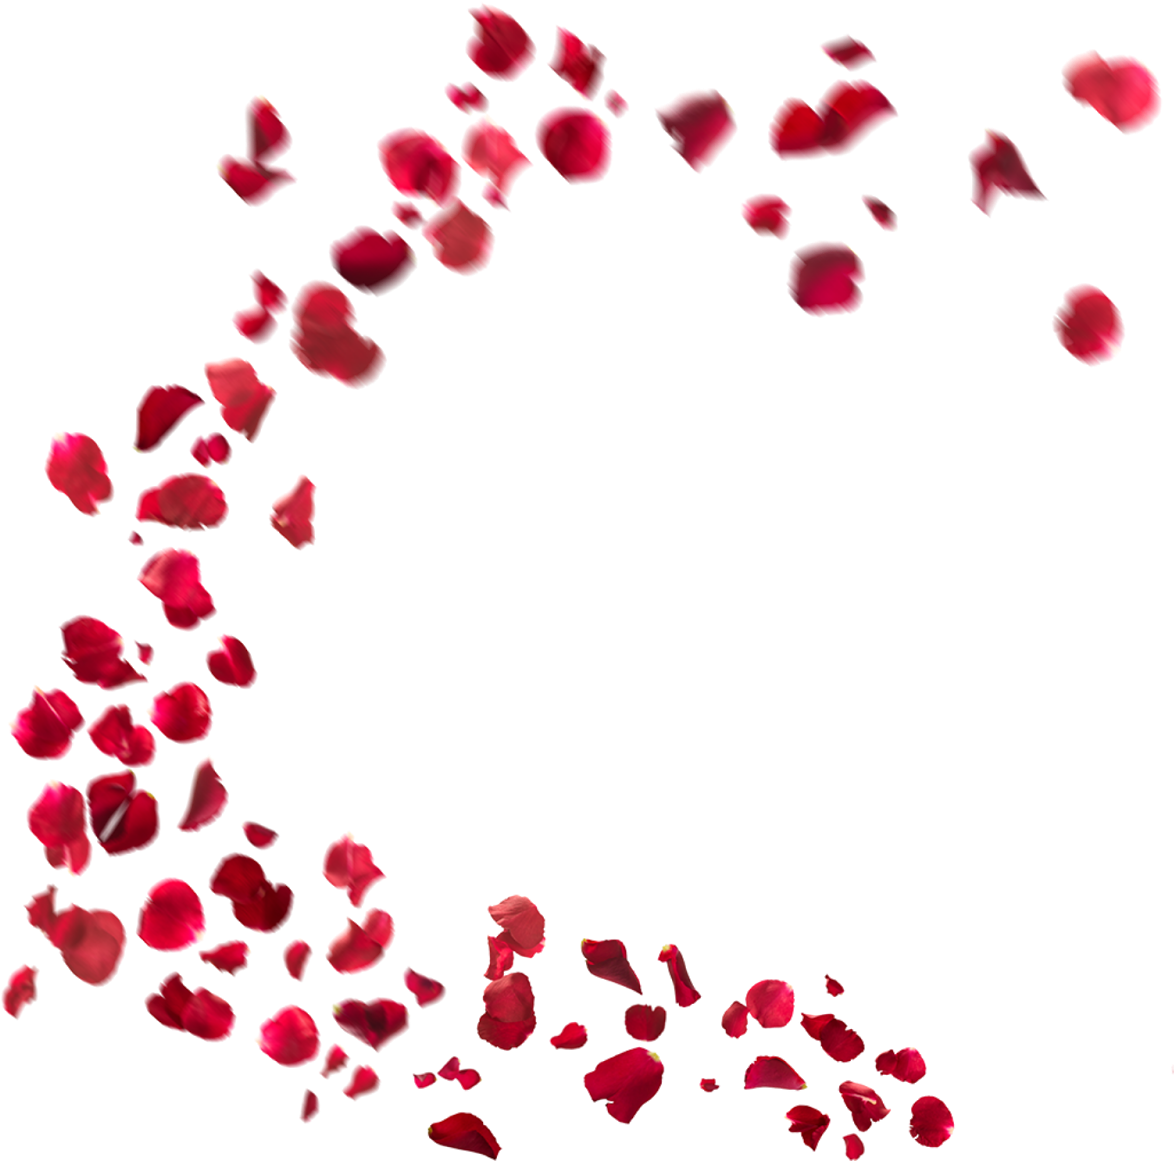 A Group Of Red Rose Petals